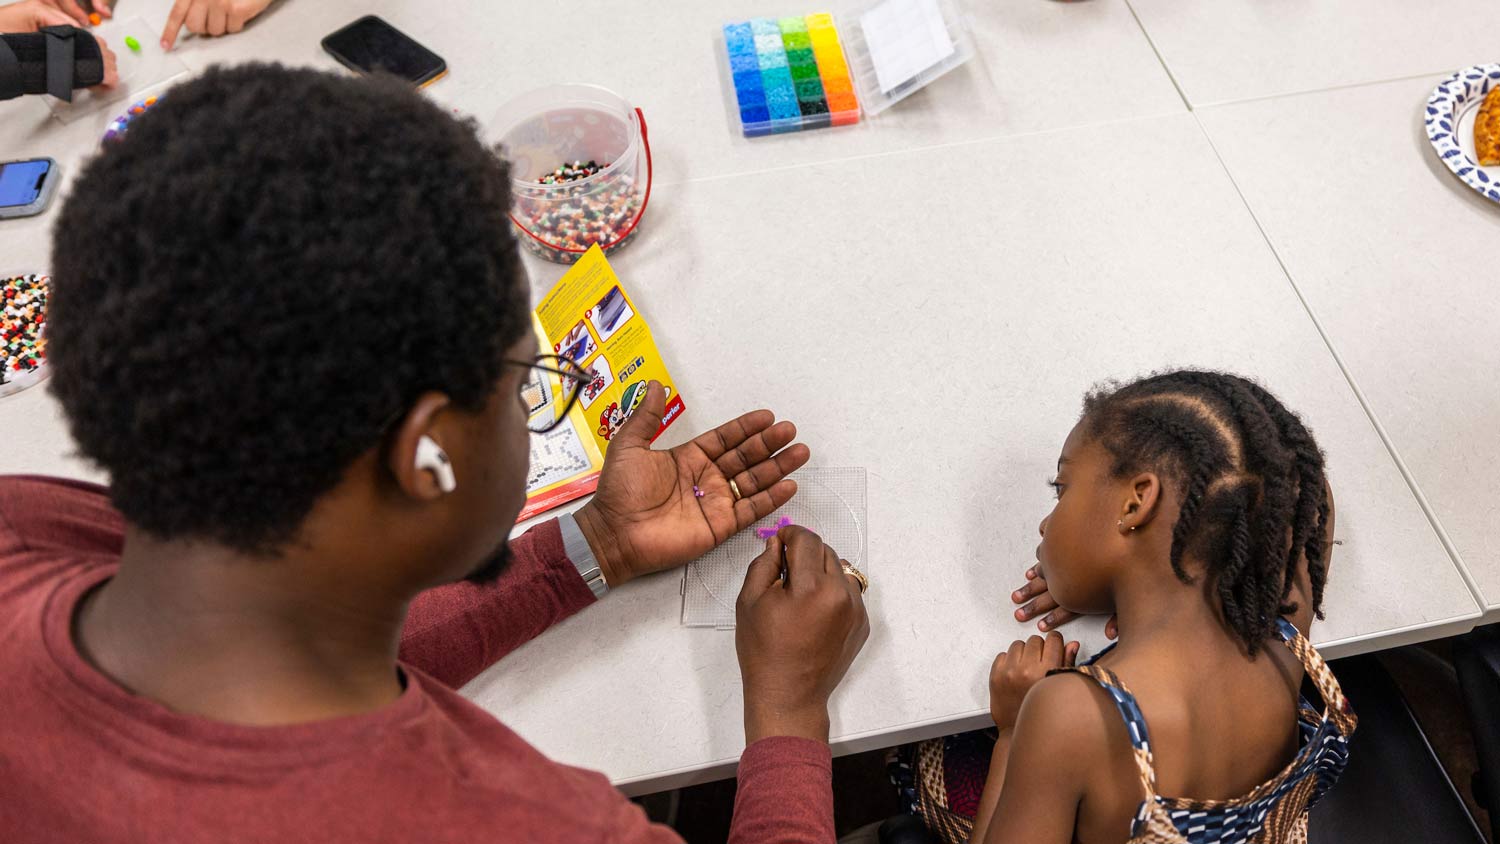 A Texas A&M student works on a craft with a child at an event